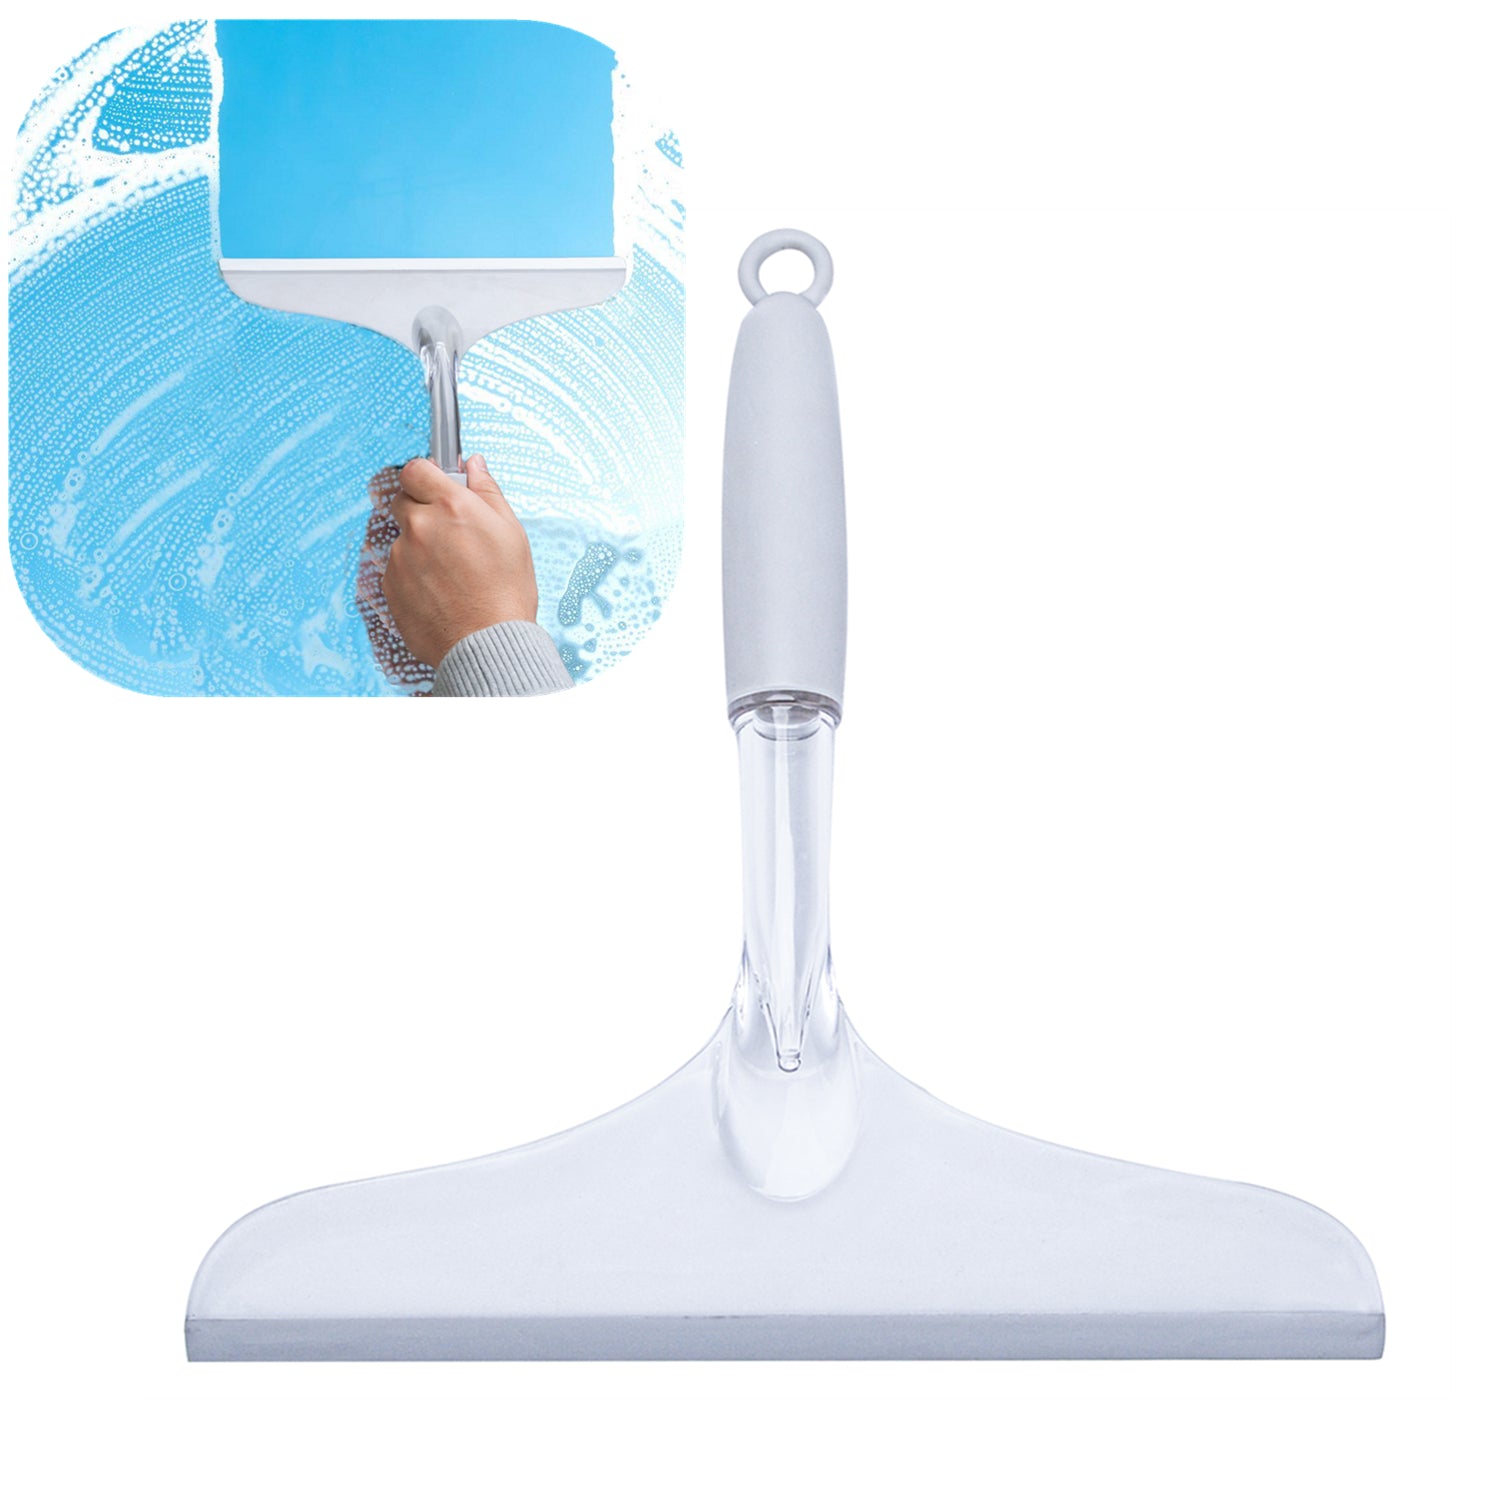 Squeegee For Shower Glass Door Shower Squeegee For Tile Shower Walls Window  Squeegee Window Cleaner Tool For Bathroom